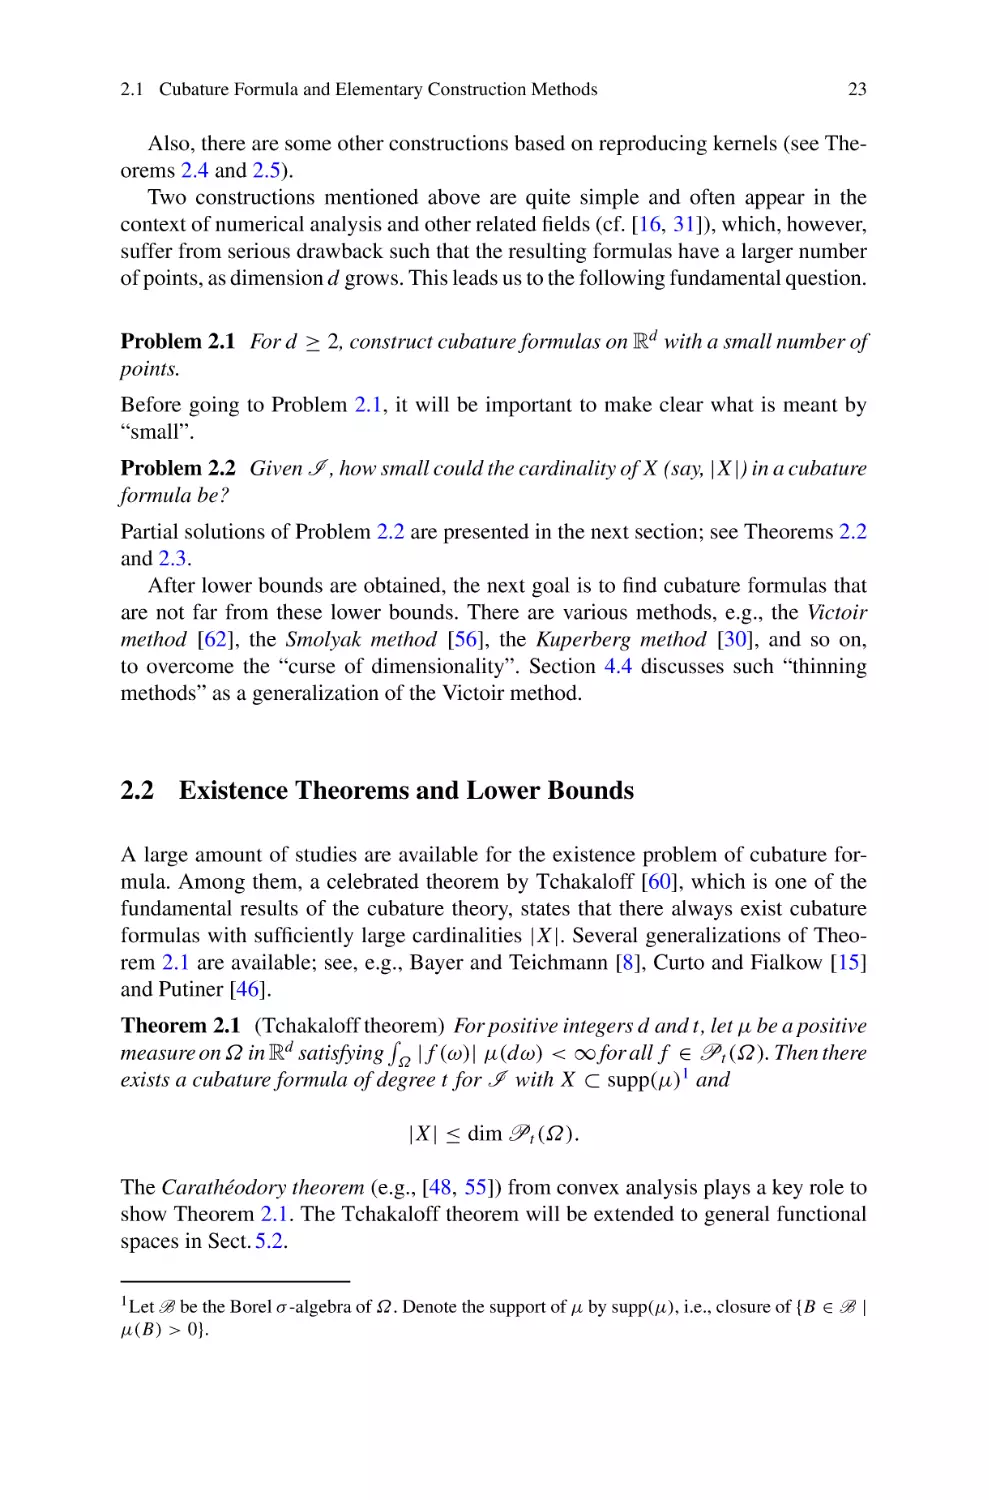 2.2 Existence Theorems and Lower Bounds